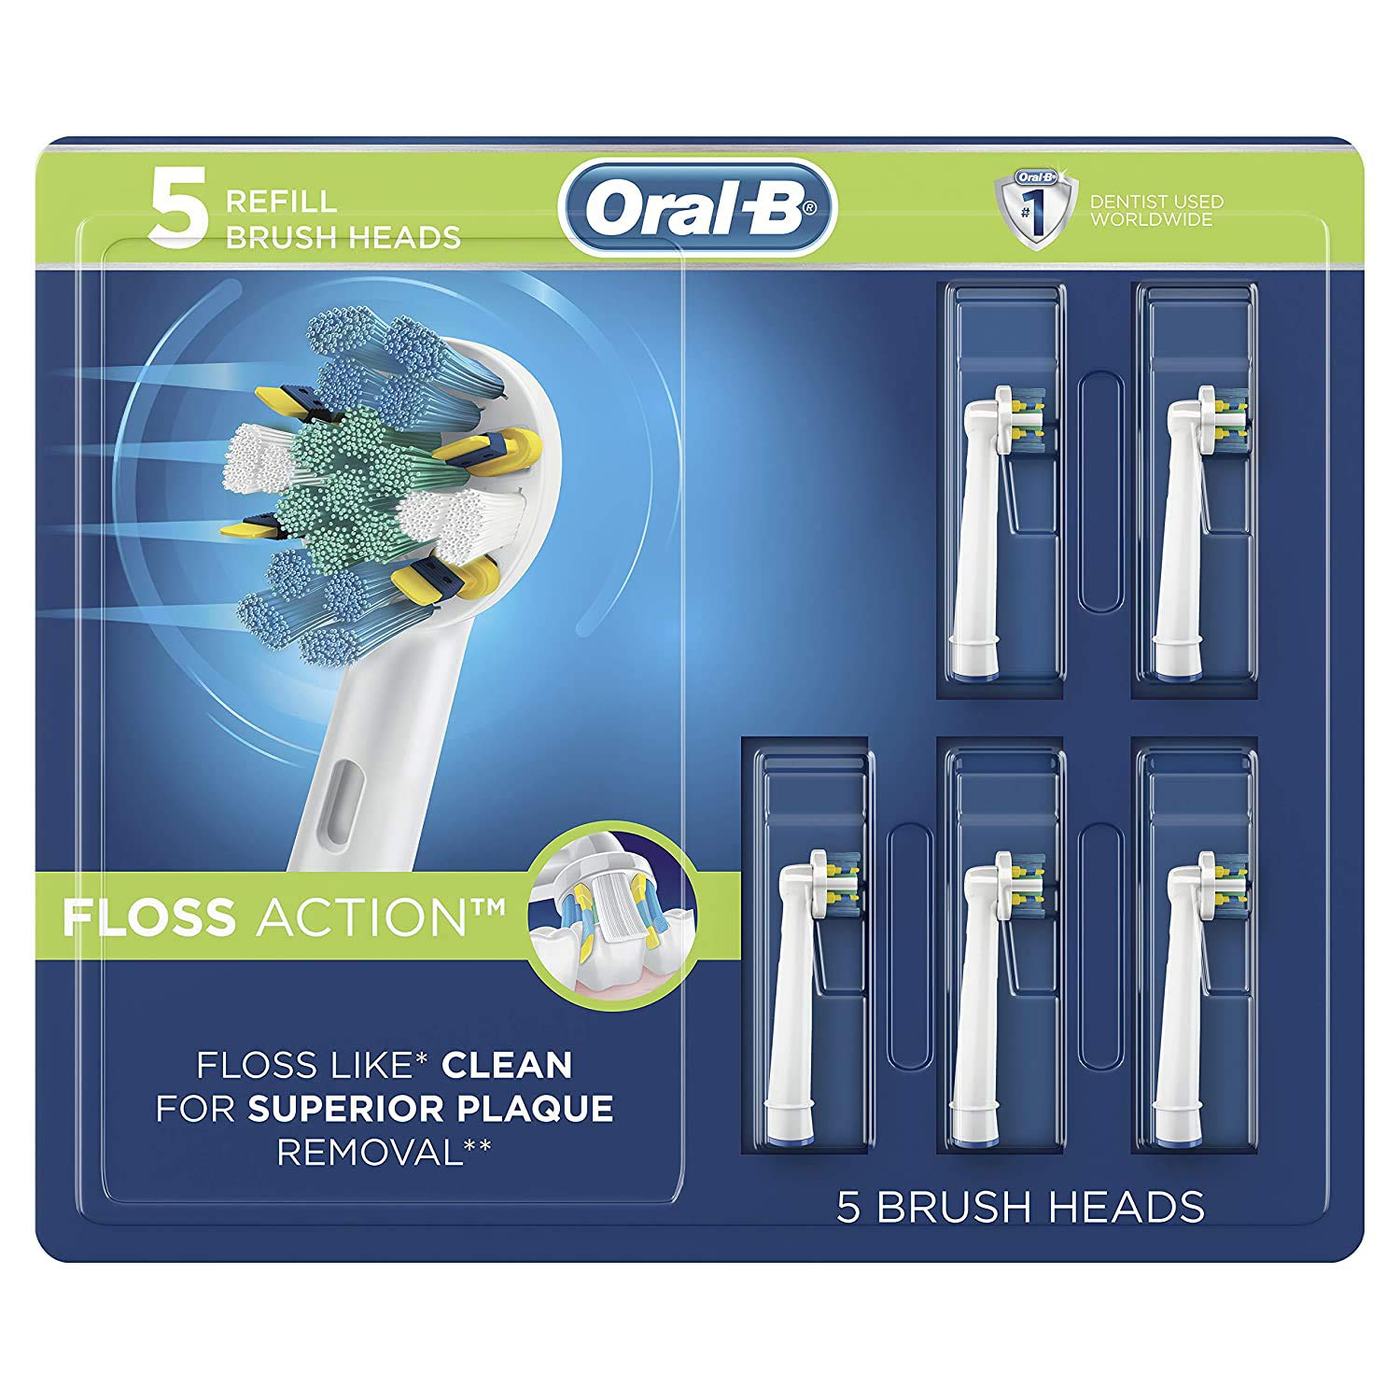 Oral-B FlossAction Toothbrush Refill Brush Heads, 5 Count